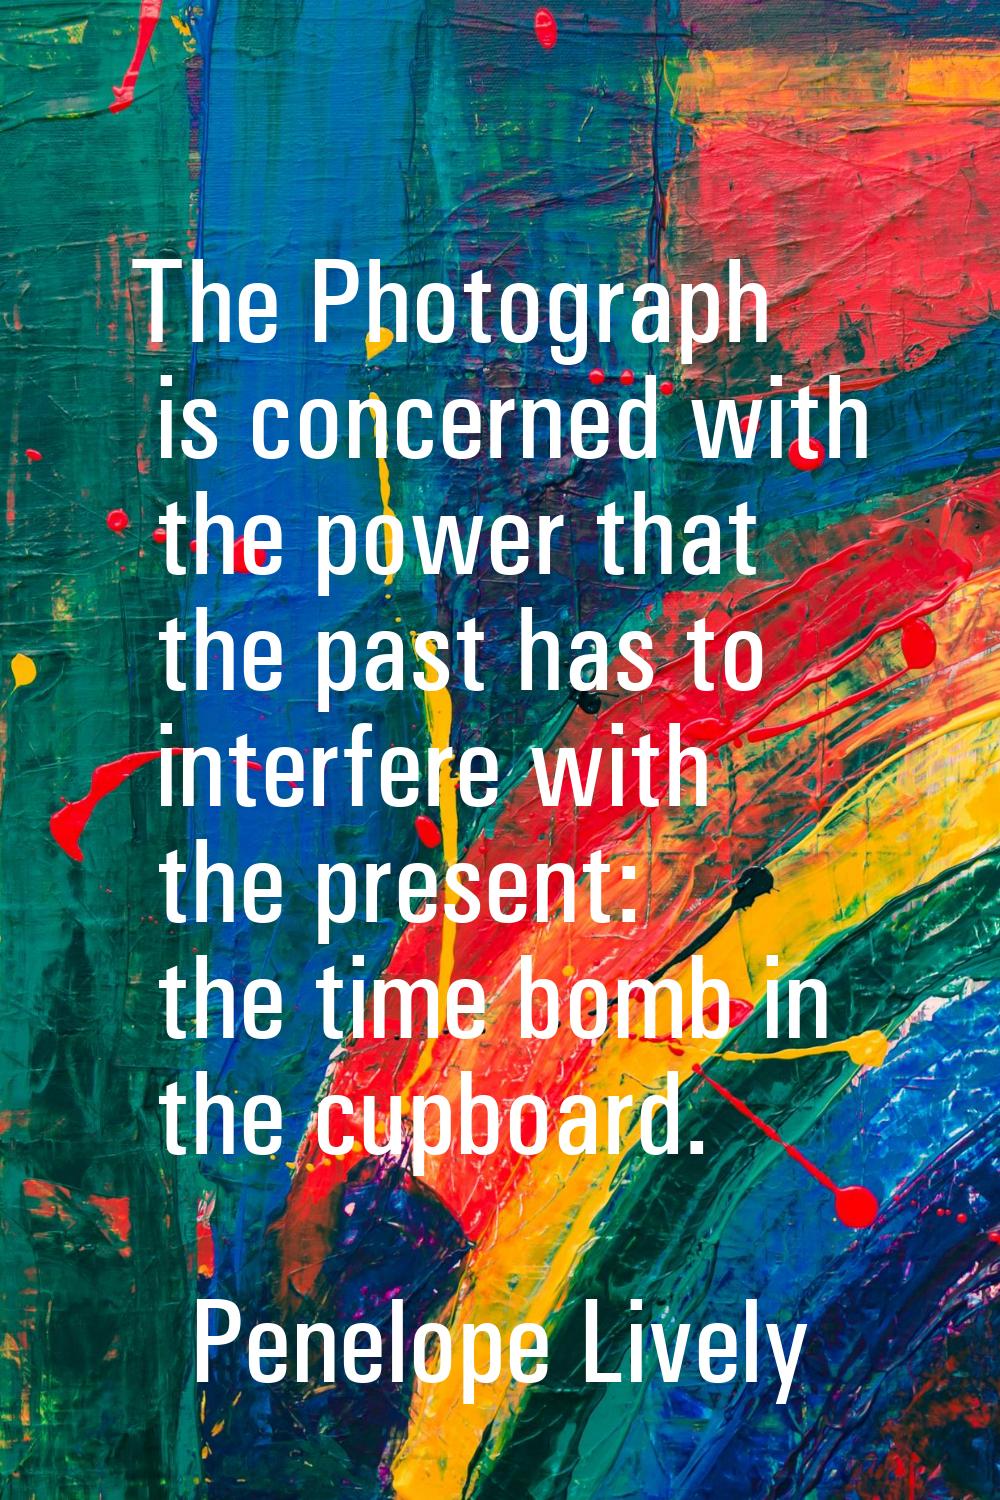 The Photograph is concerned with the power that the past has to interfere with the present: the tim